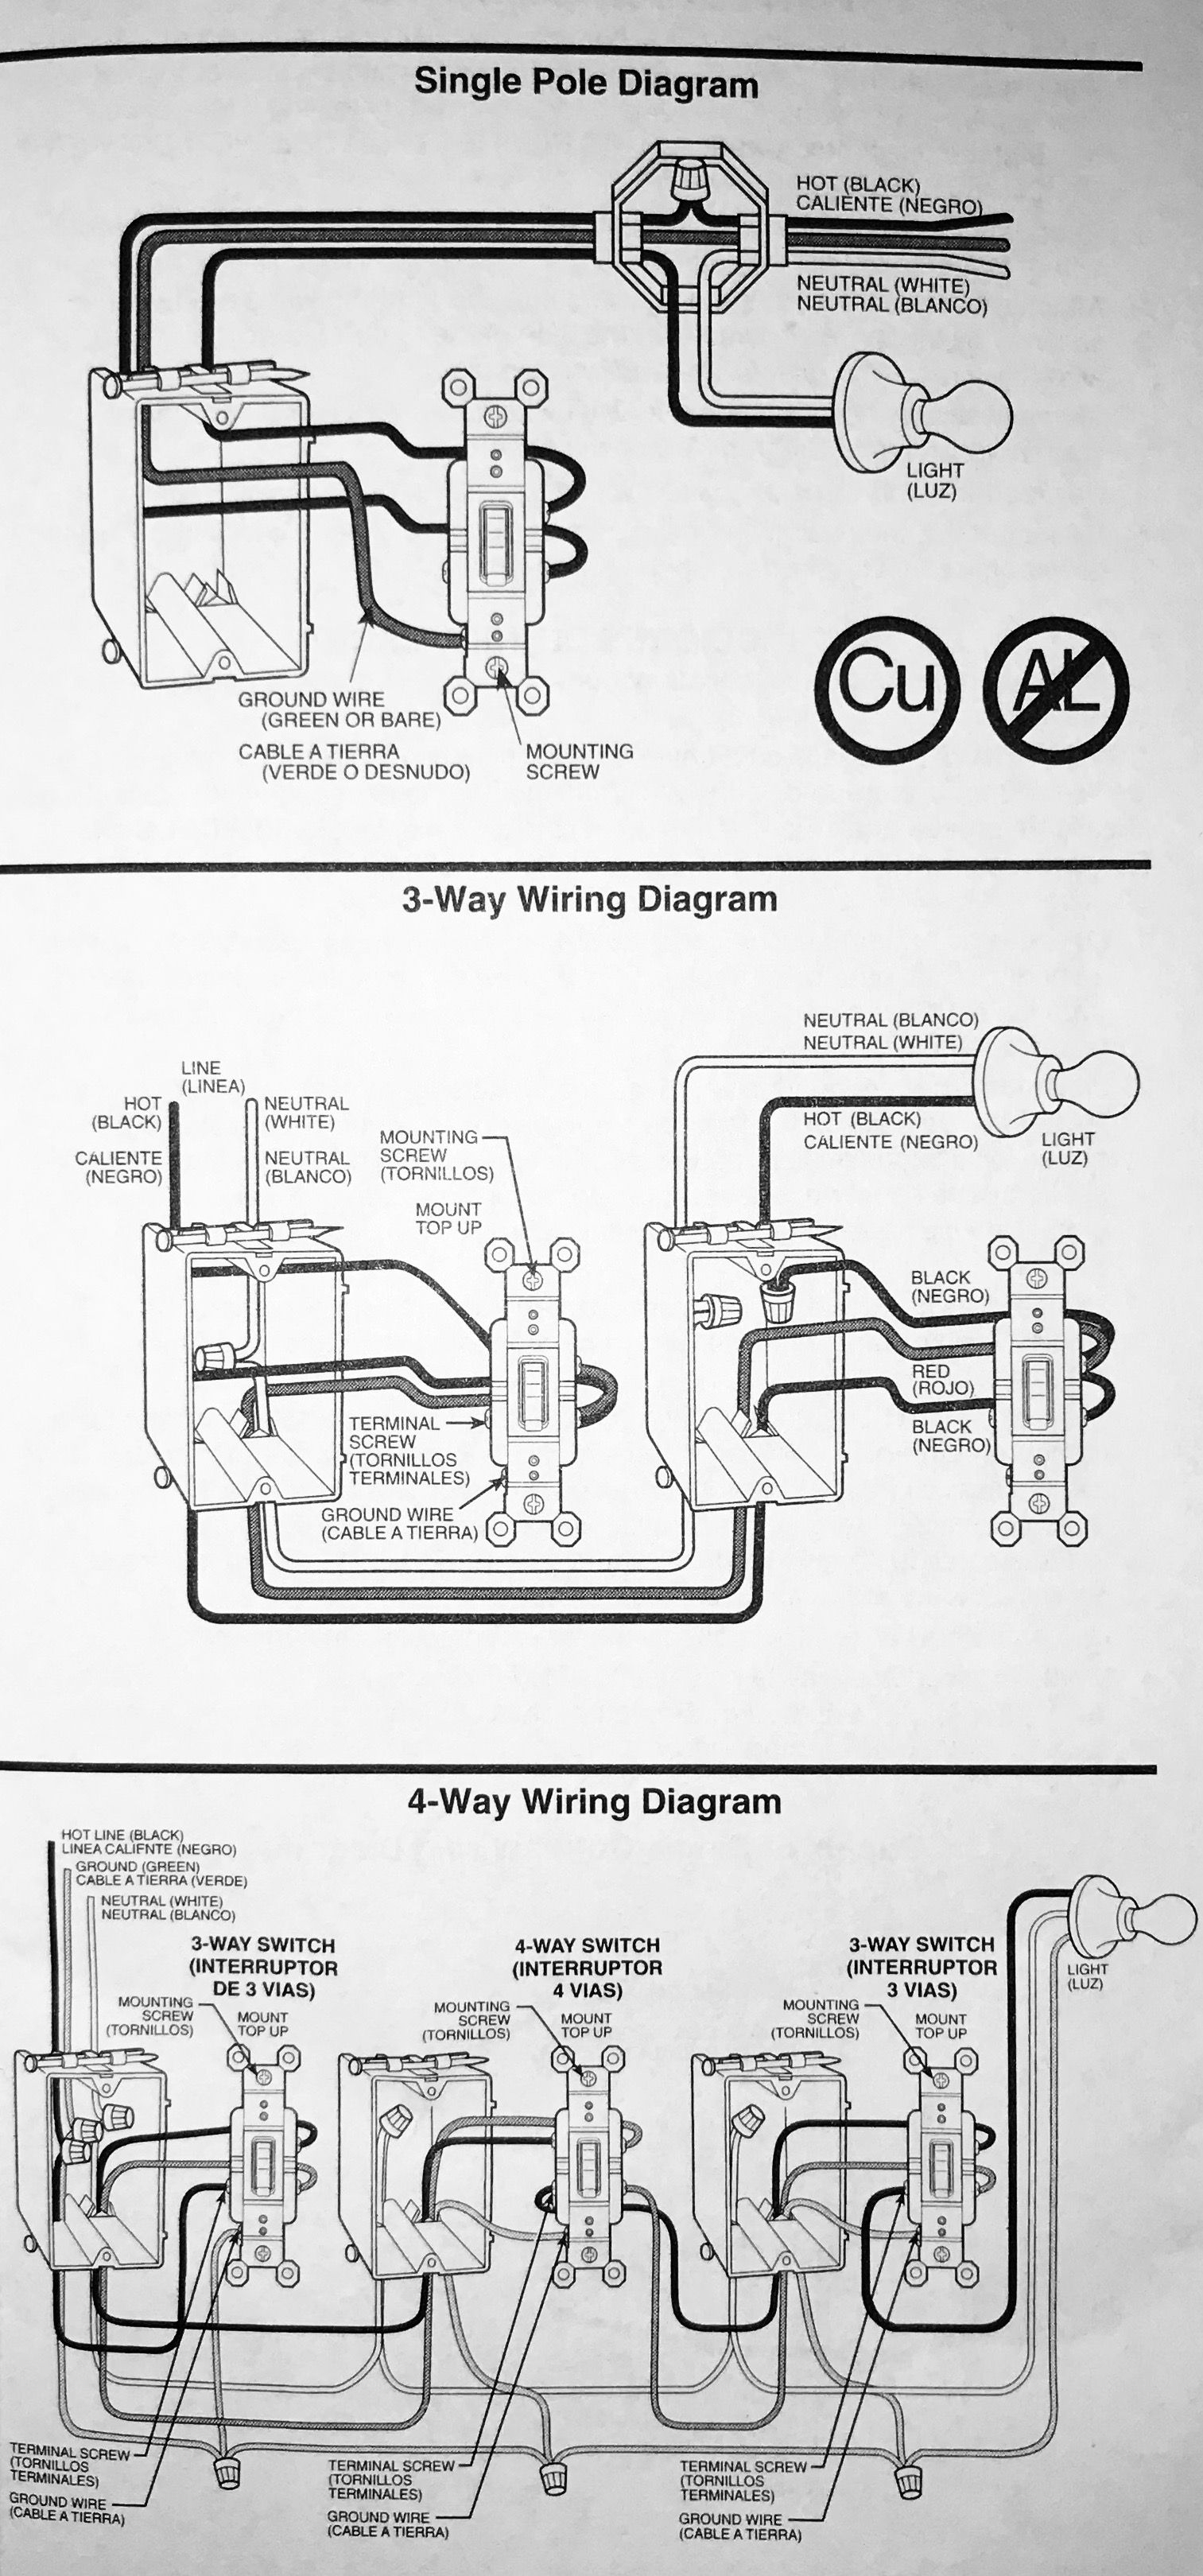 Installation Of Single Pole, 3-Way, &amp;amp; 4-Way Switches - Wiring - 4 Way Wiring Diagram